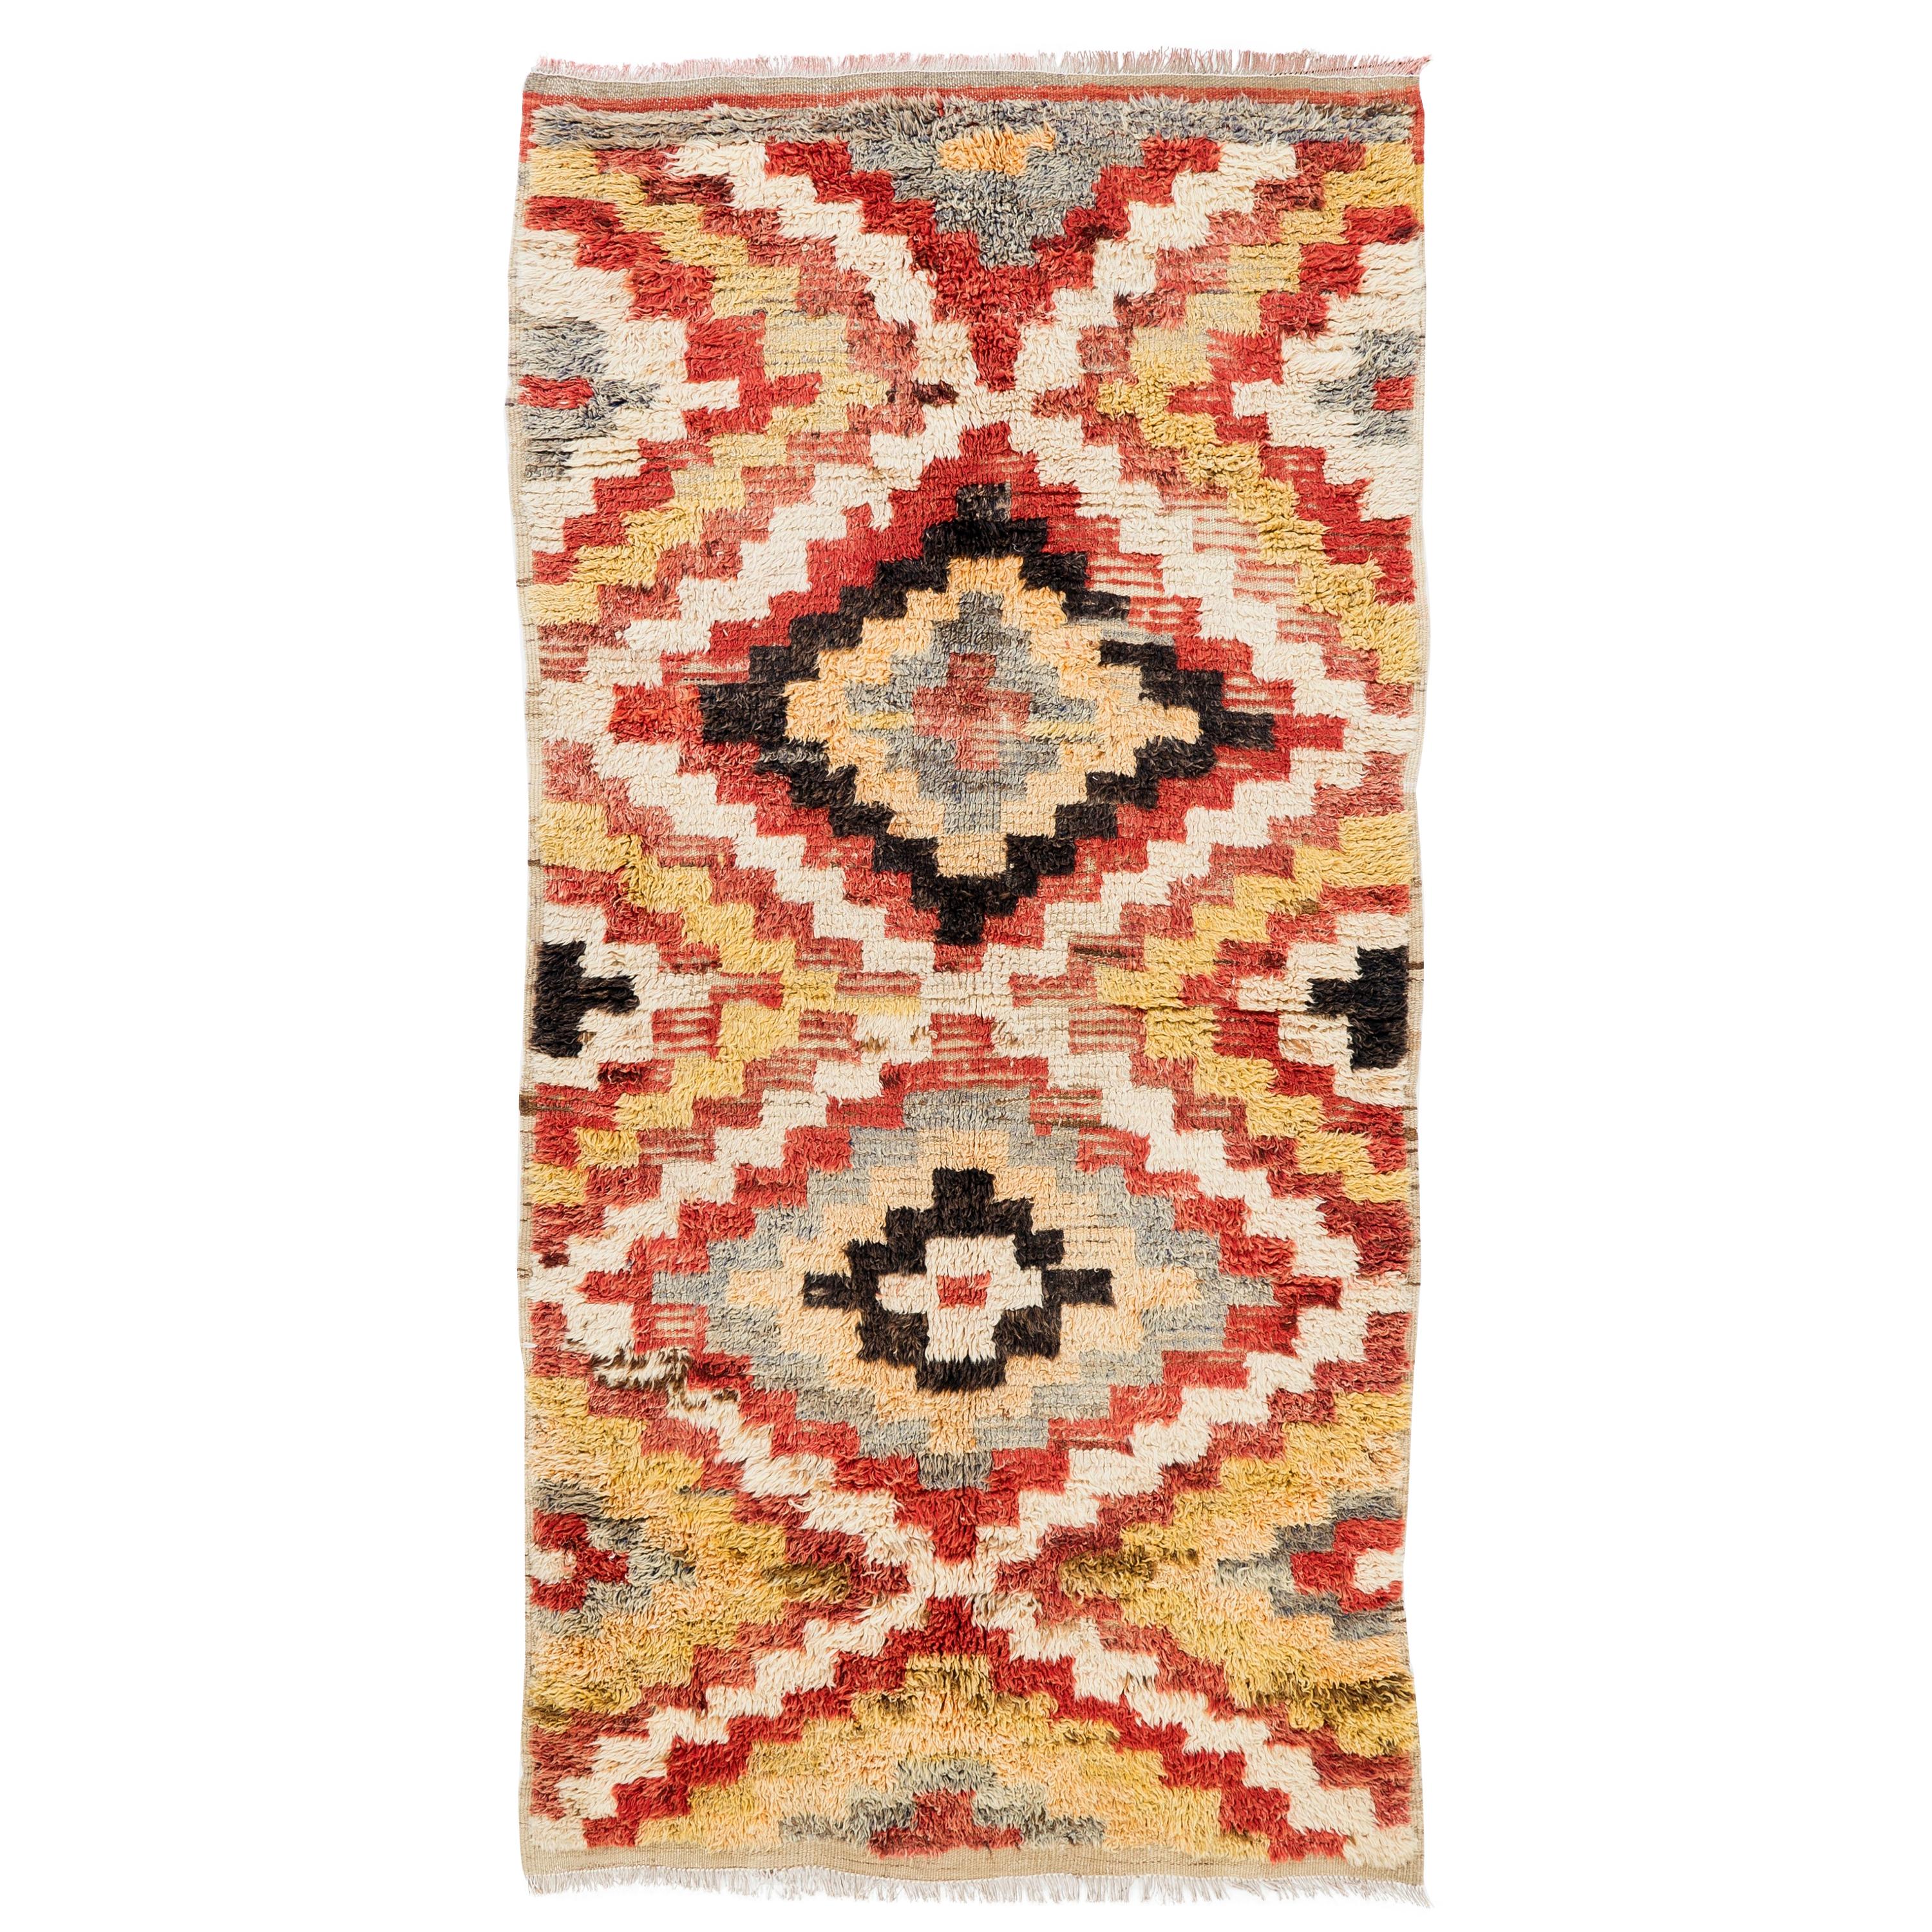 4.2x8 Ft Multicolor Hand-Knotted Vintage Tulu Runner Rug, Checkered Wool Carpet